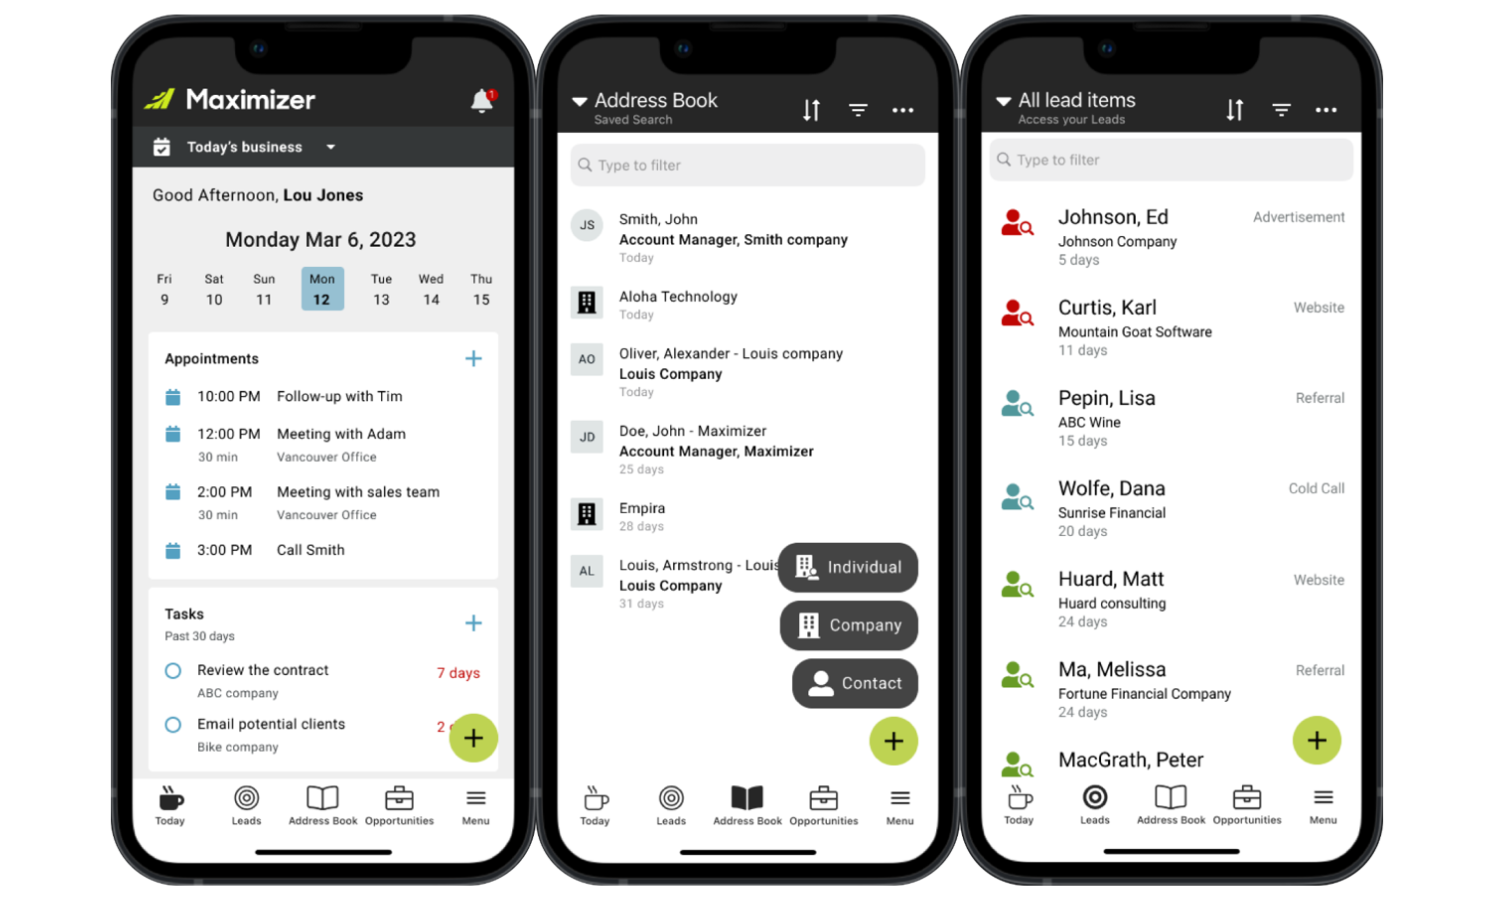 Our feature-rich mobile app allows you to manage your schedule, update your pipeline, and connect with customers while on the go!